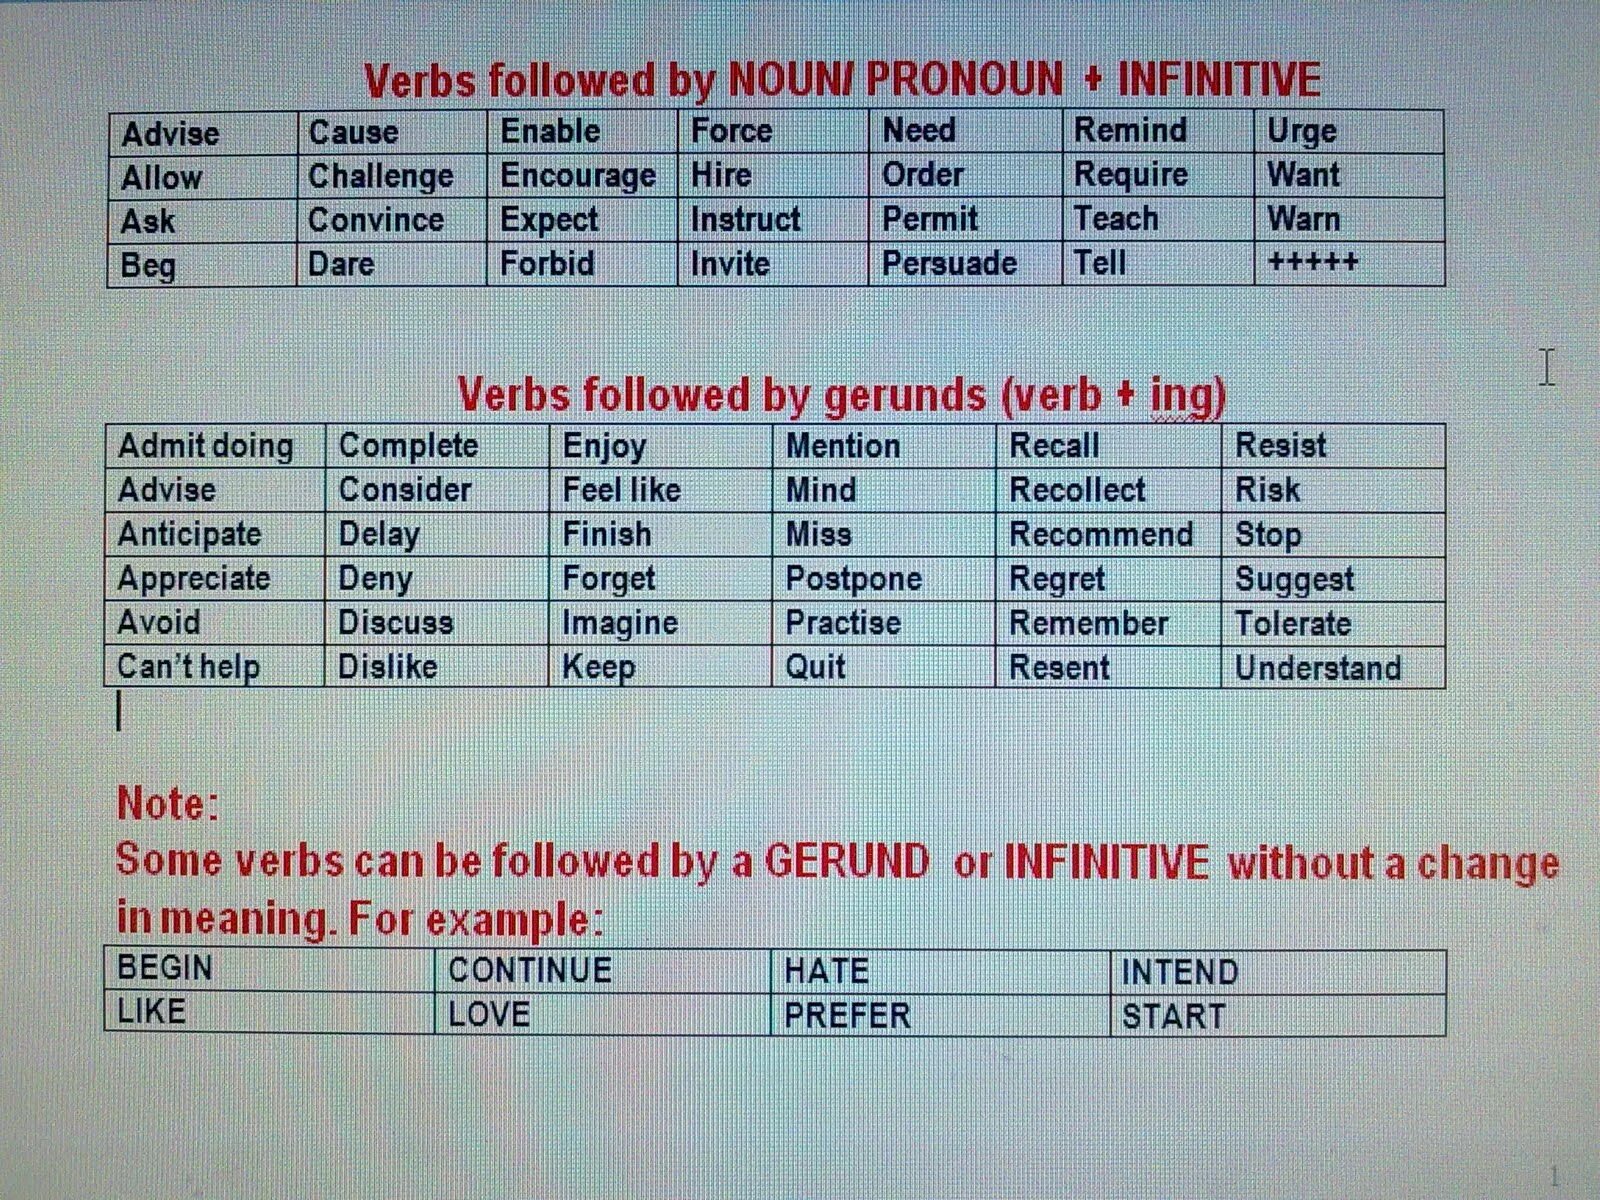 2 infinitive without to. Verb ing verb Infinitive таблицы. Infinitive verbs list. Английские глаголы с to и ing. Infinitives verbs правило.